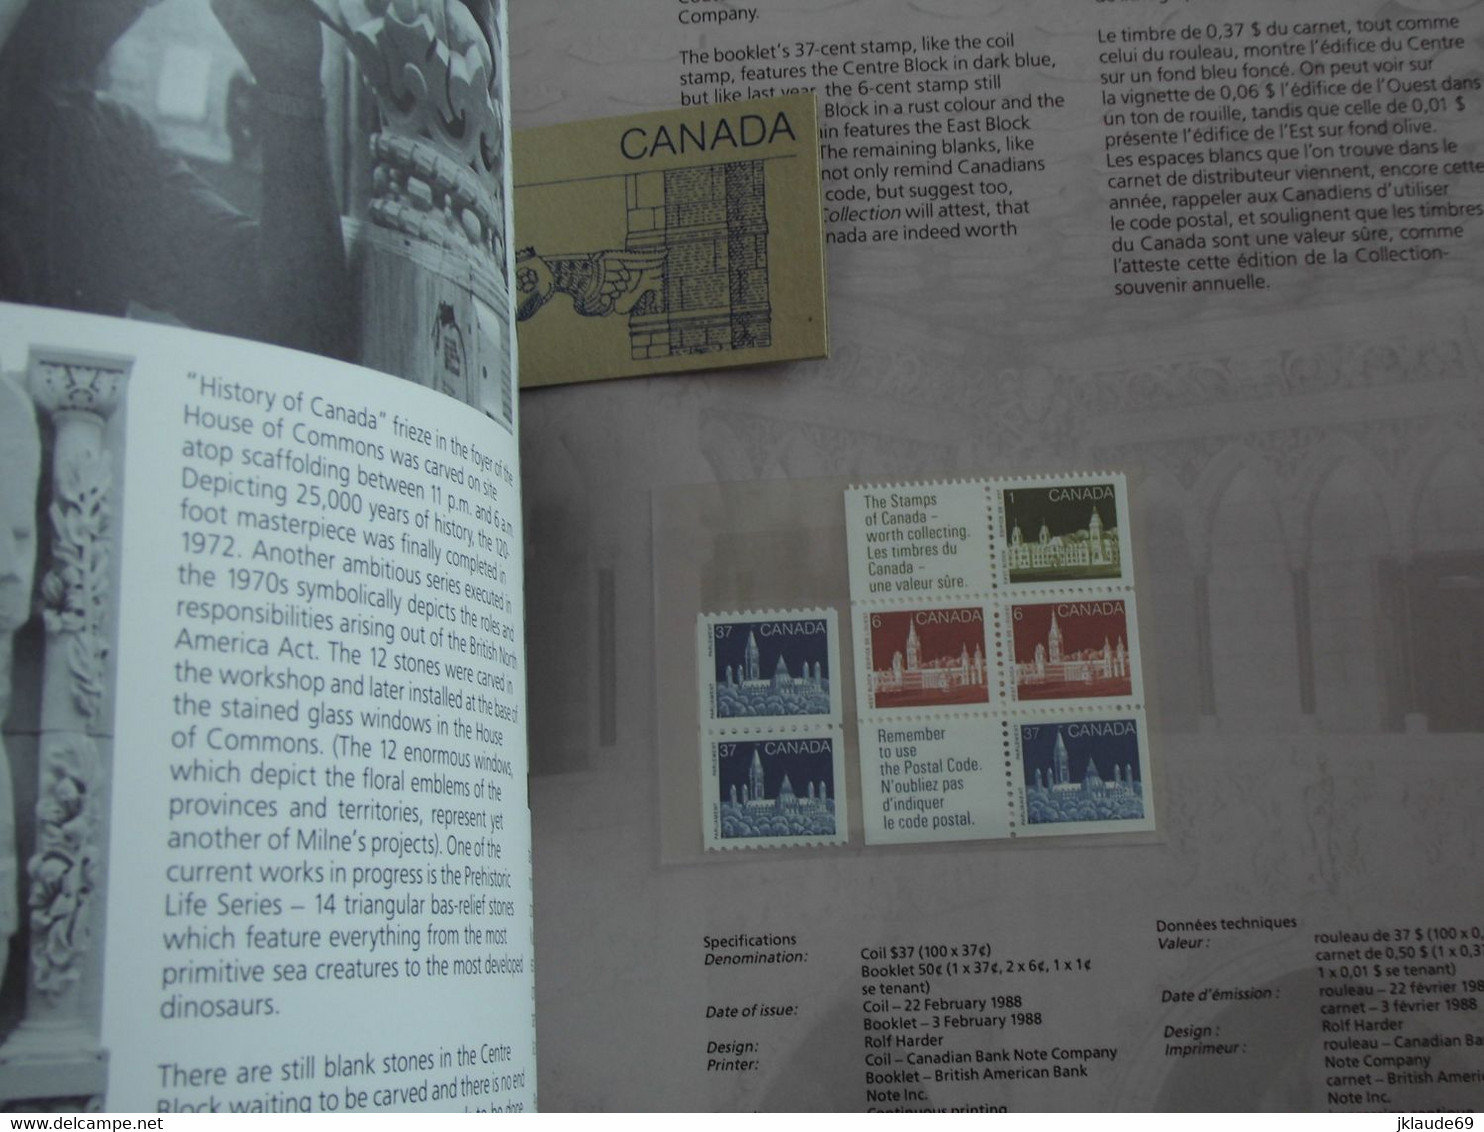 CANADA COLLECTION OF THE POSTAGE STAMPS OF CANADA 1988 LIVRE DE L'ANNEE YEAR BOOK  Complet Avec Timbres Neufs MNH ** - Années Complètes